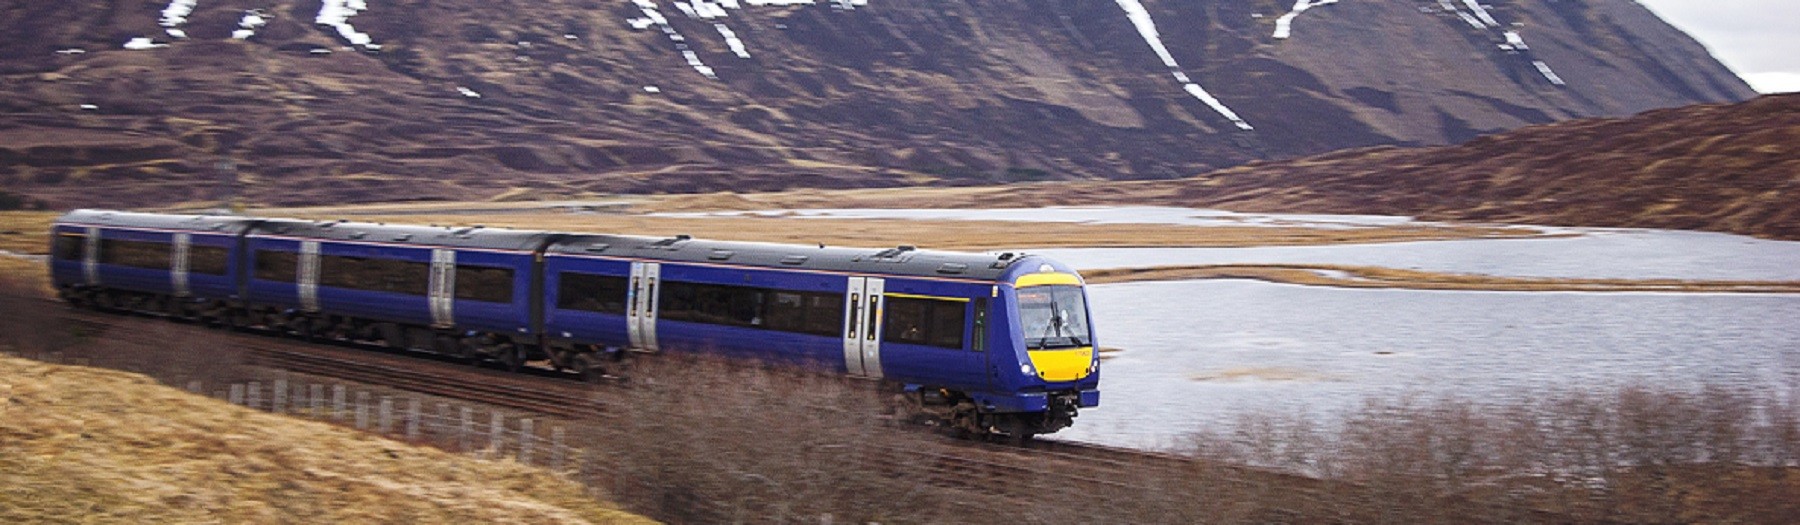 Train passing on scenic route